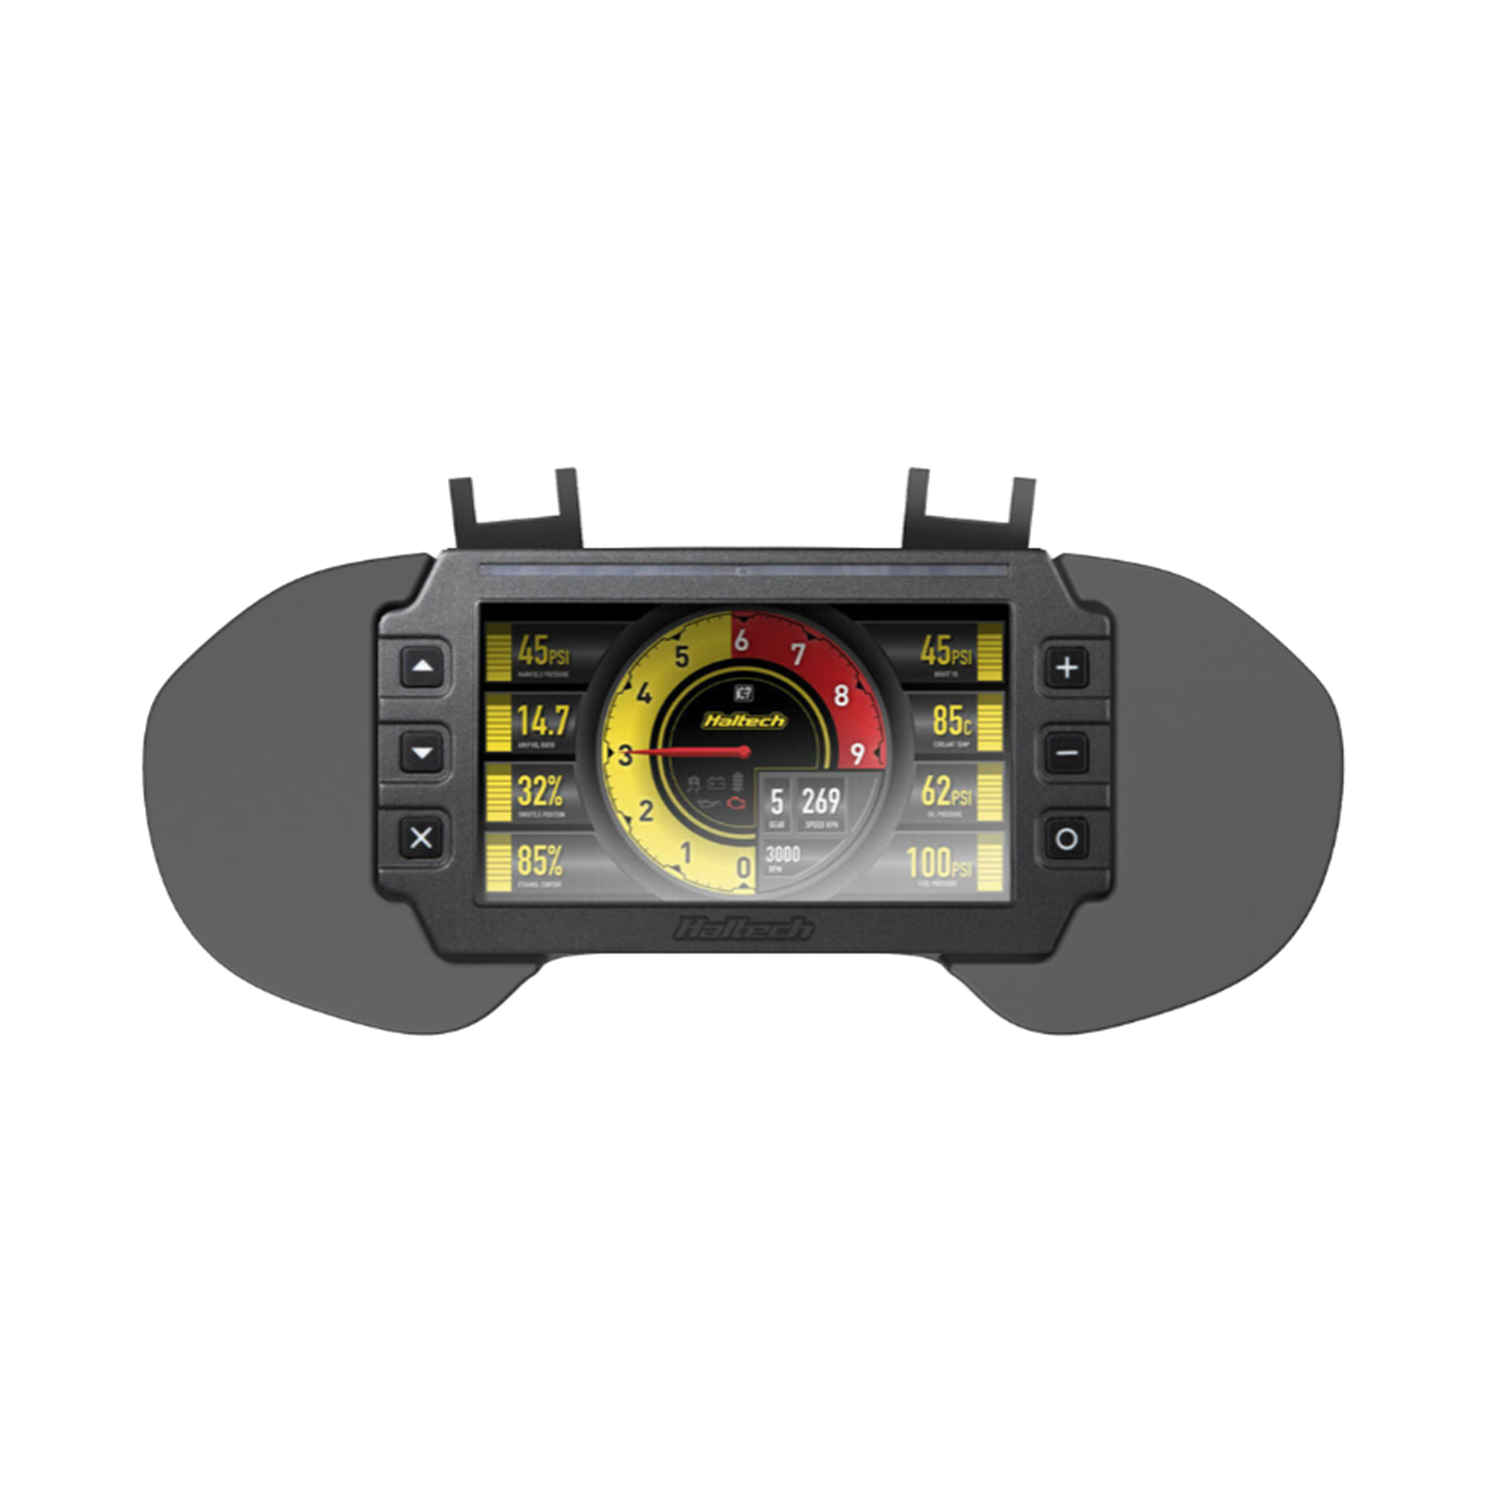 Toyota Supra Mk4 Series 1 93-98 Recessed Dash Mount for the Haltech iC-7 (display not included)